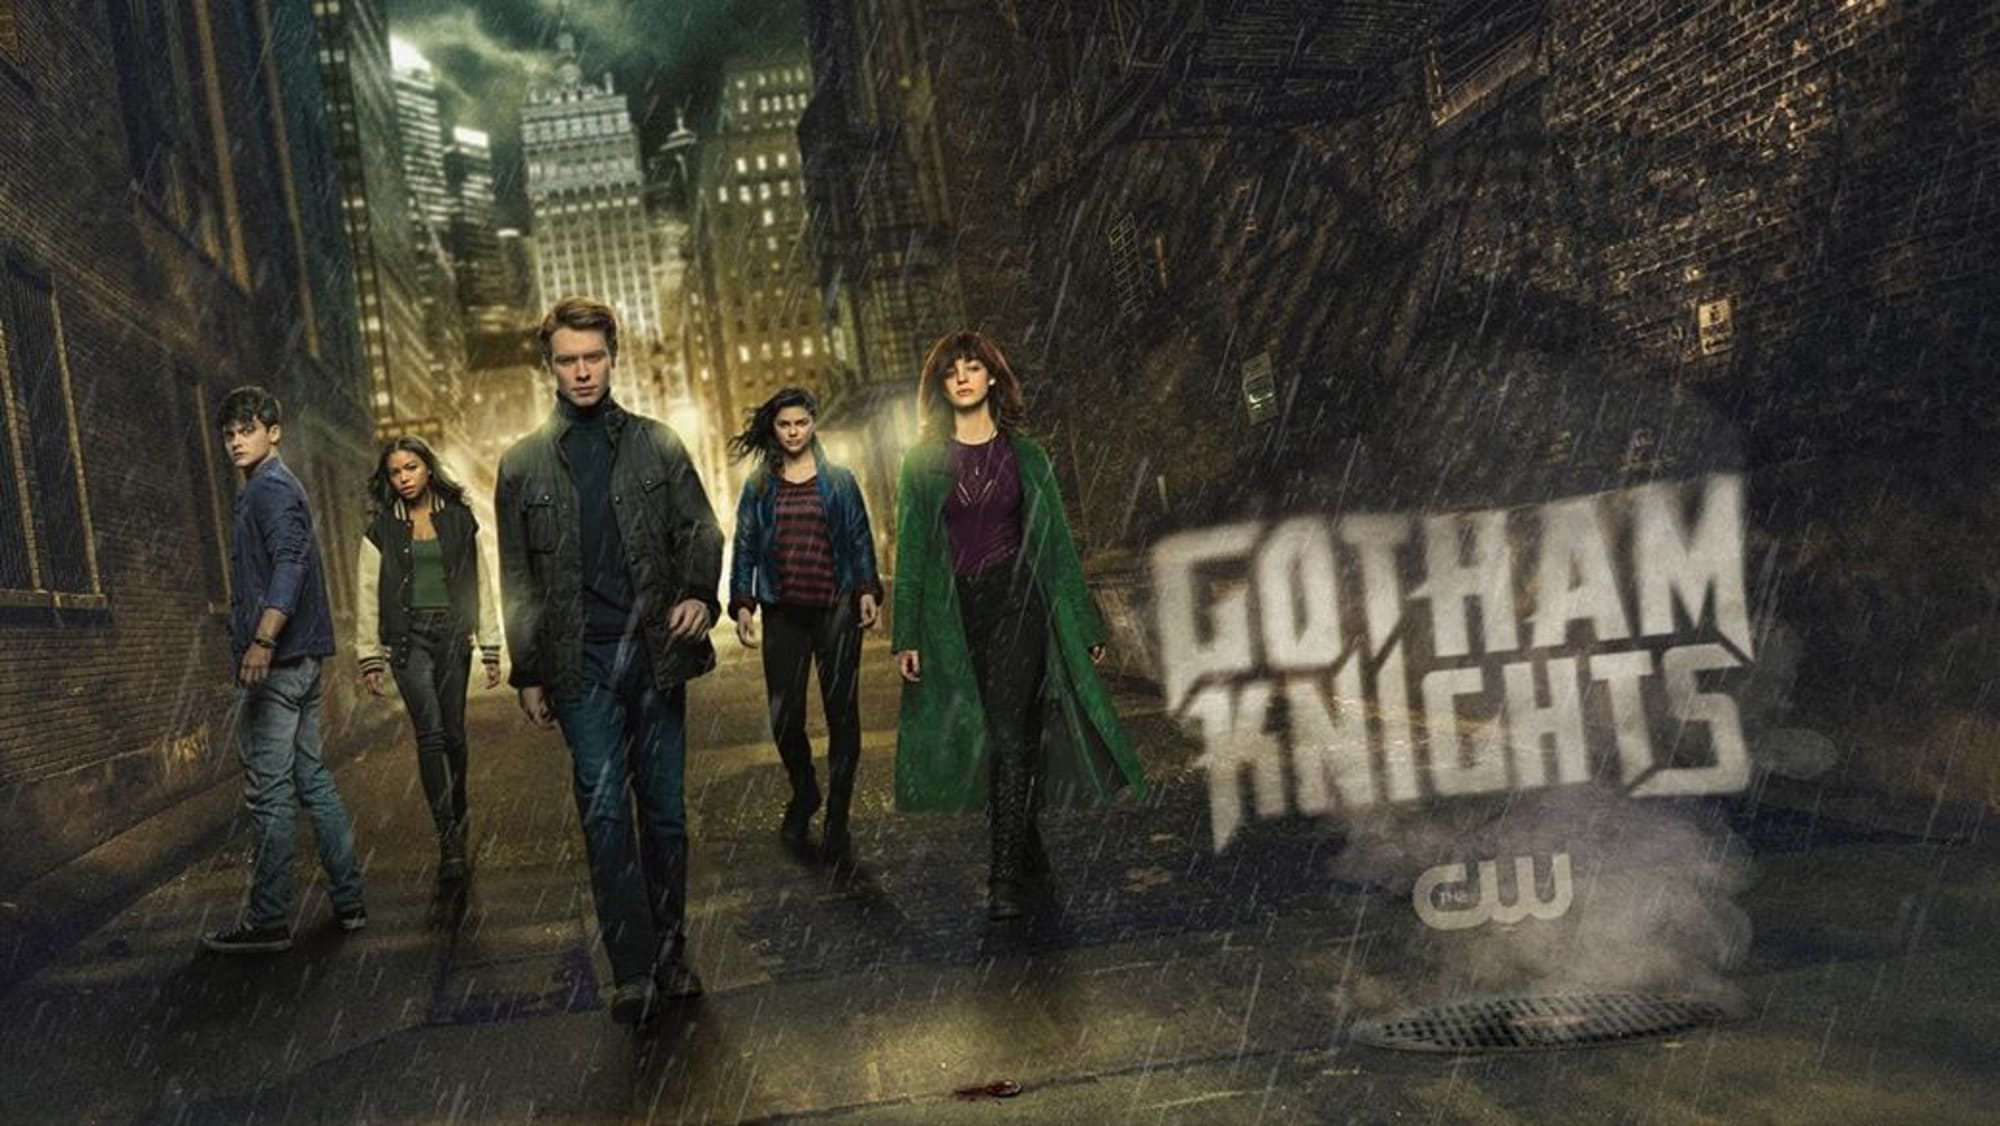 Gotham Knights is not coming to The CW in 2022